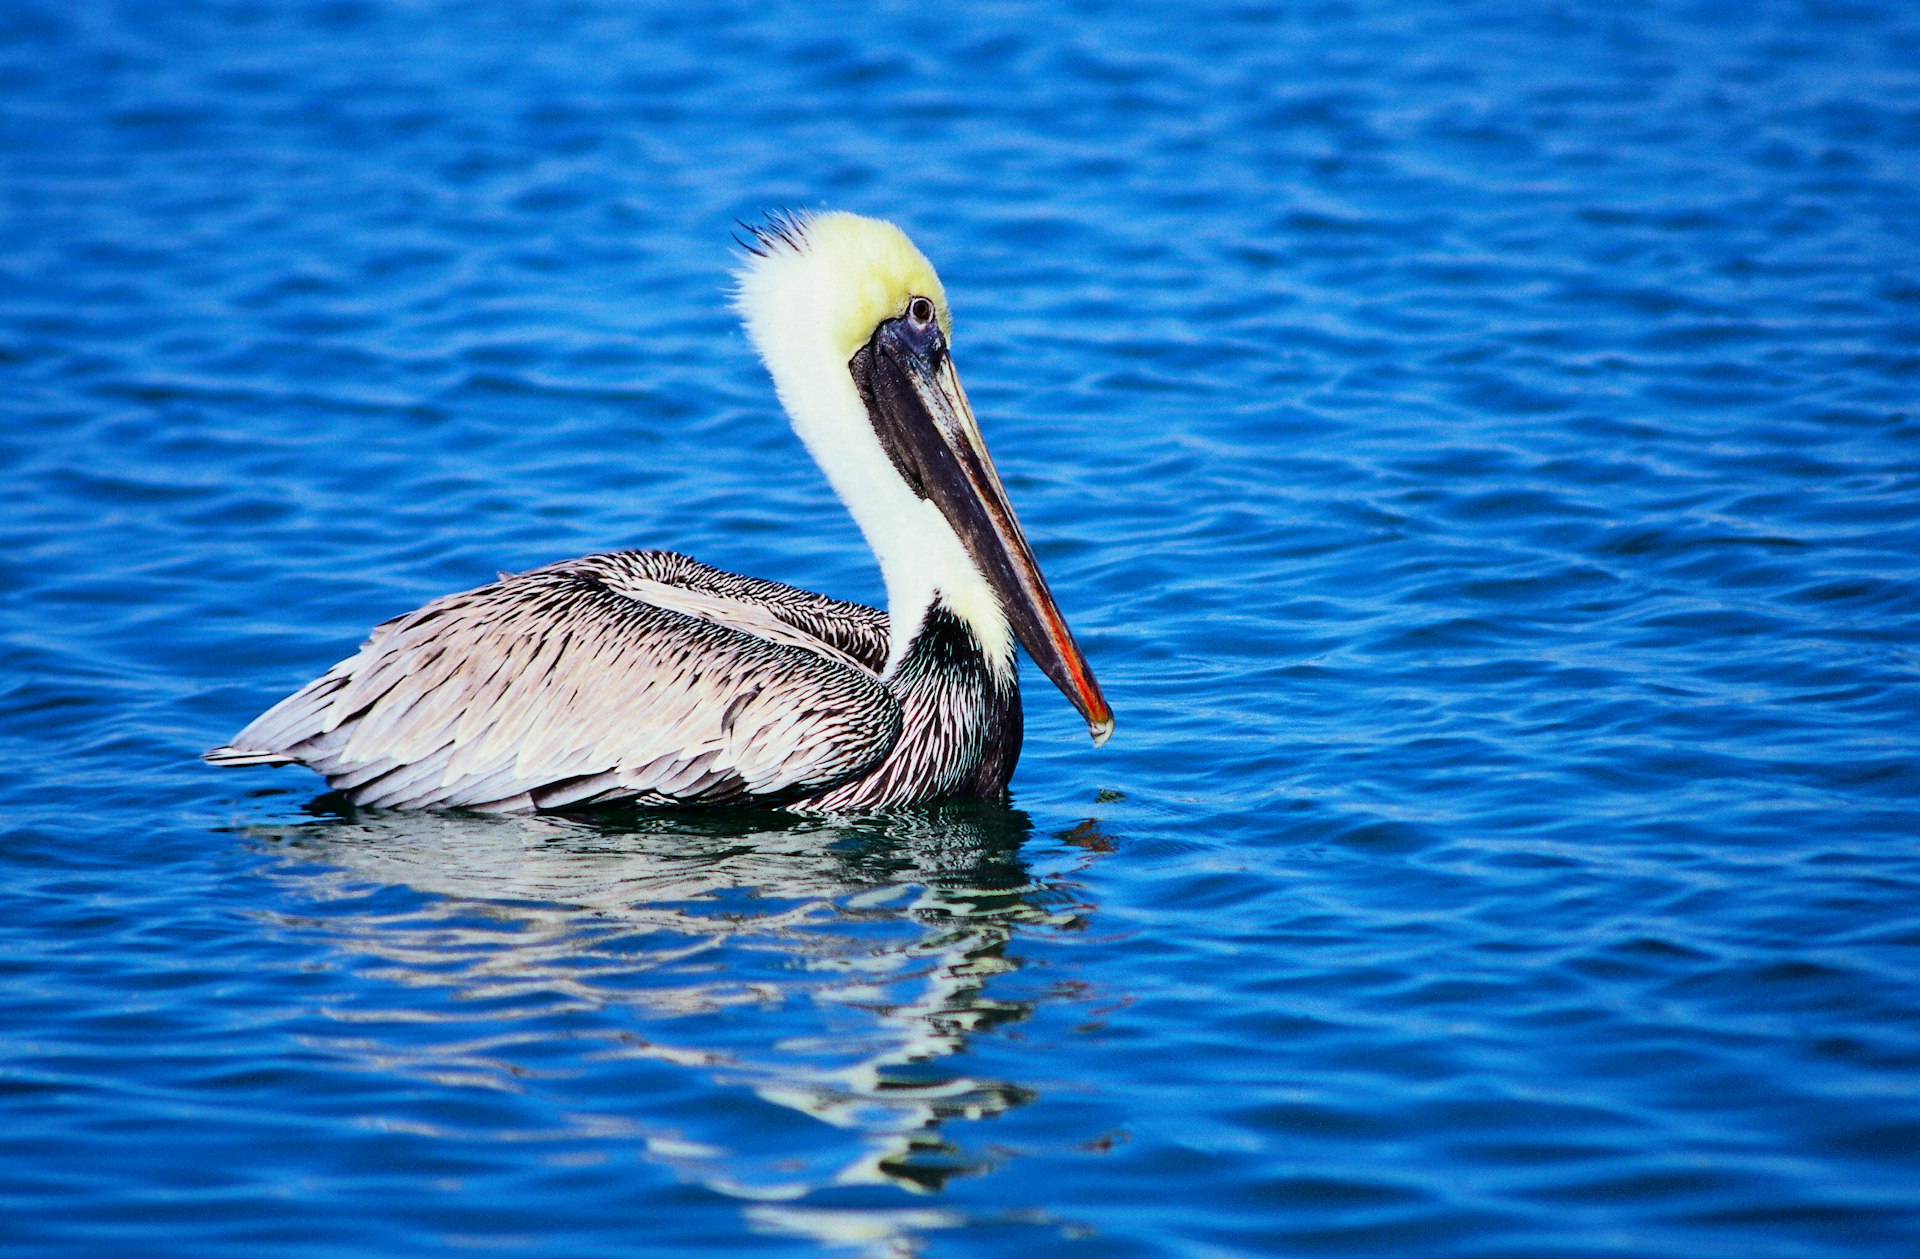 A pelican on the water